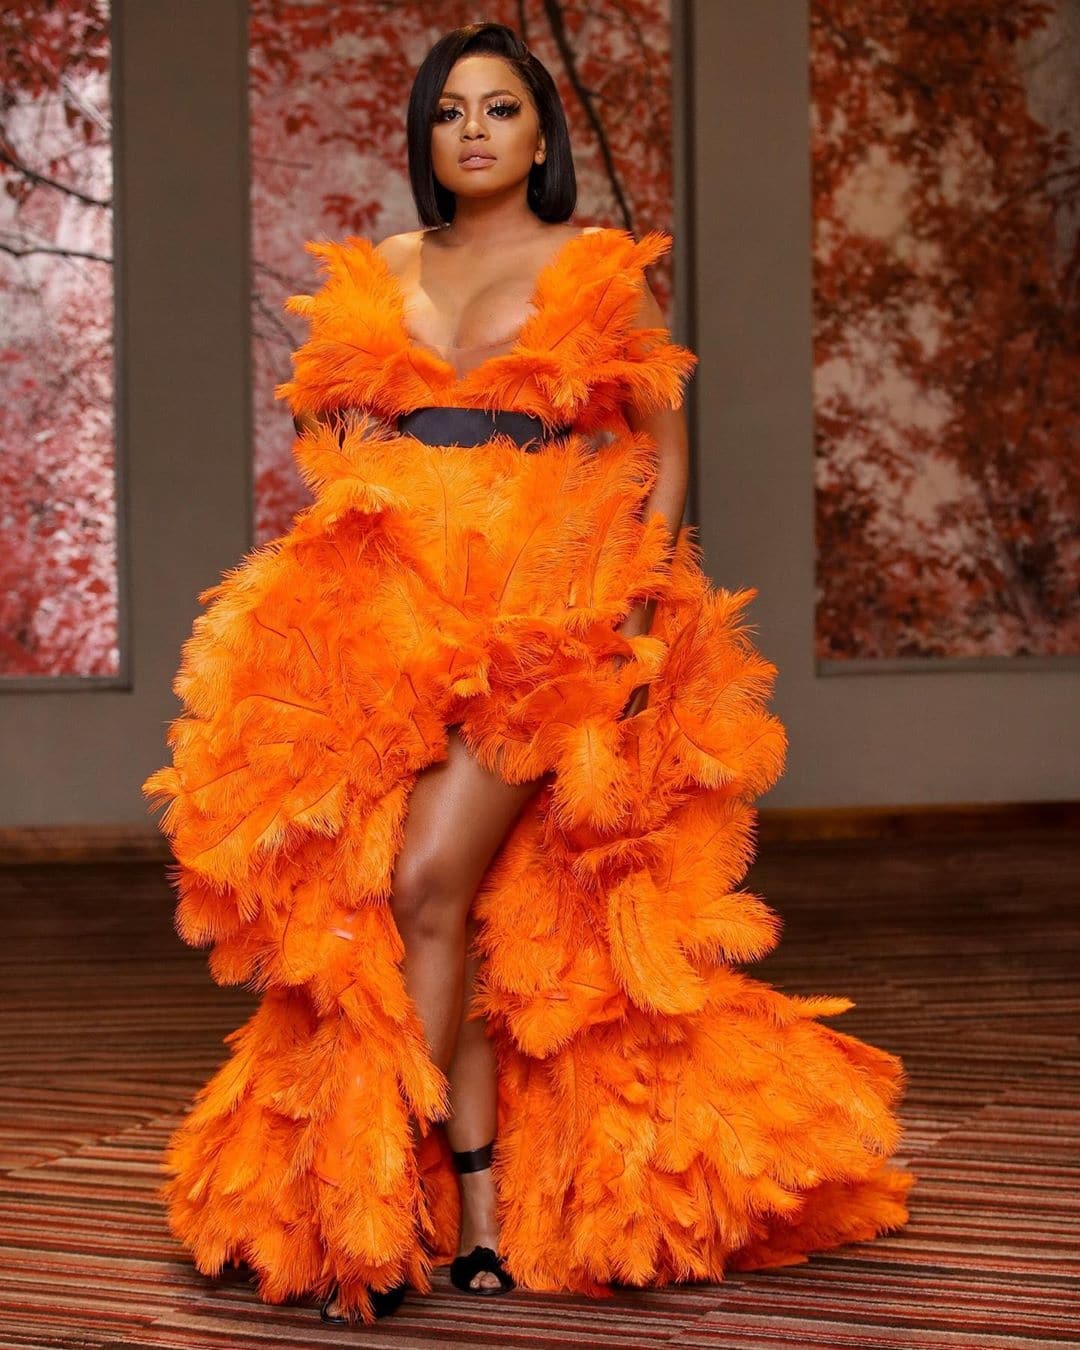 Lerato-kganyago-orange-feather-dress-the-most-rave-worthy-looks-on-women-across-africa-african-celebs-style